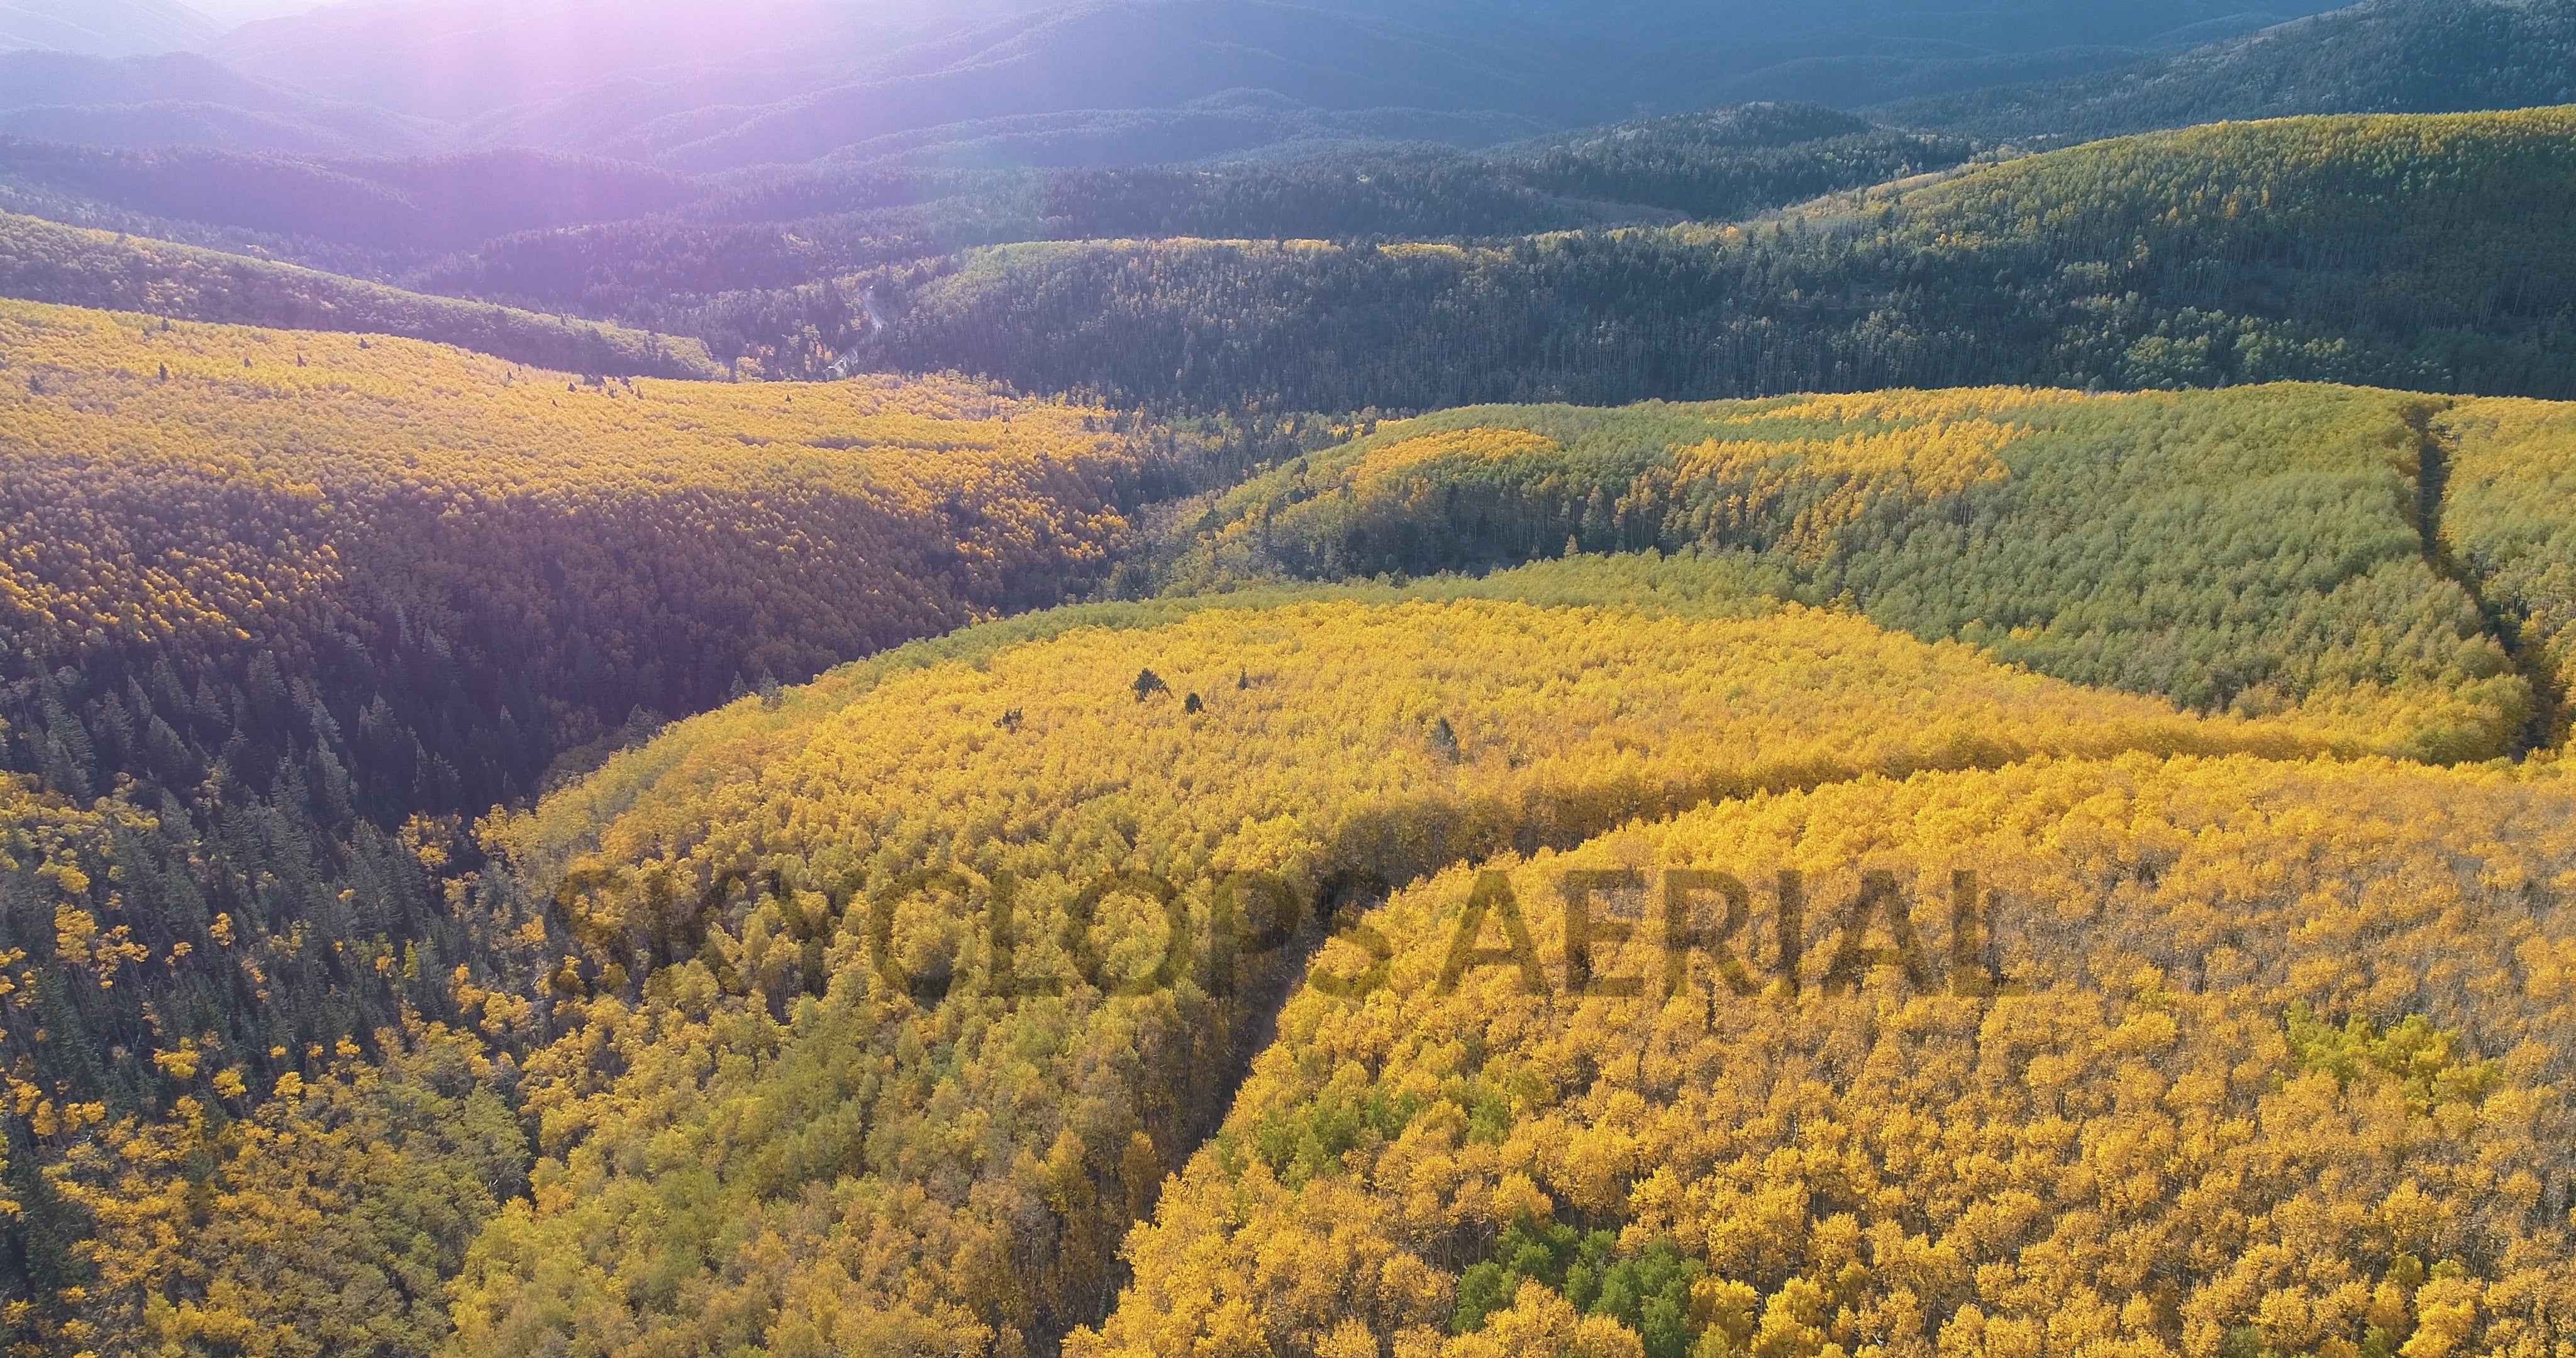 Stock video of Fall colors in the aspen forests on the Santa Fe Mountain near Santa Fe, New Mexico